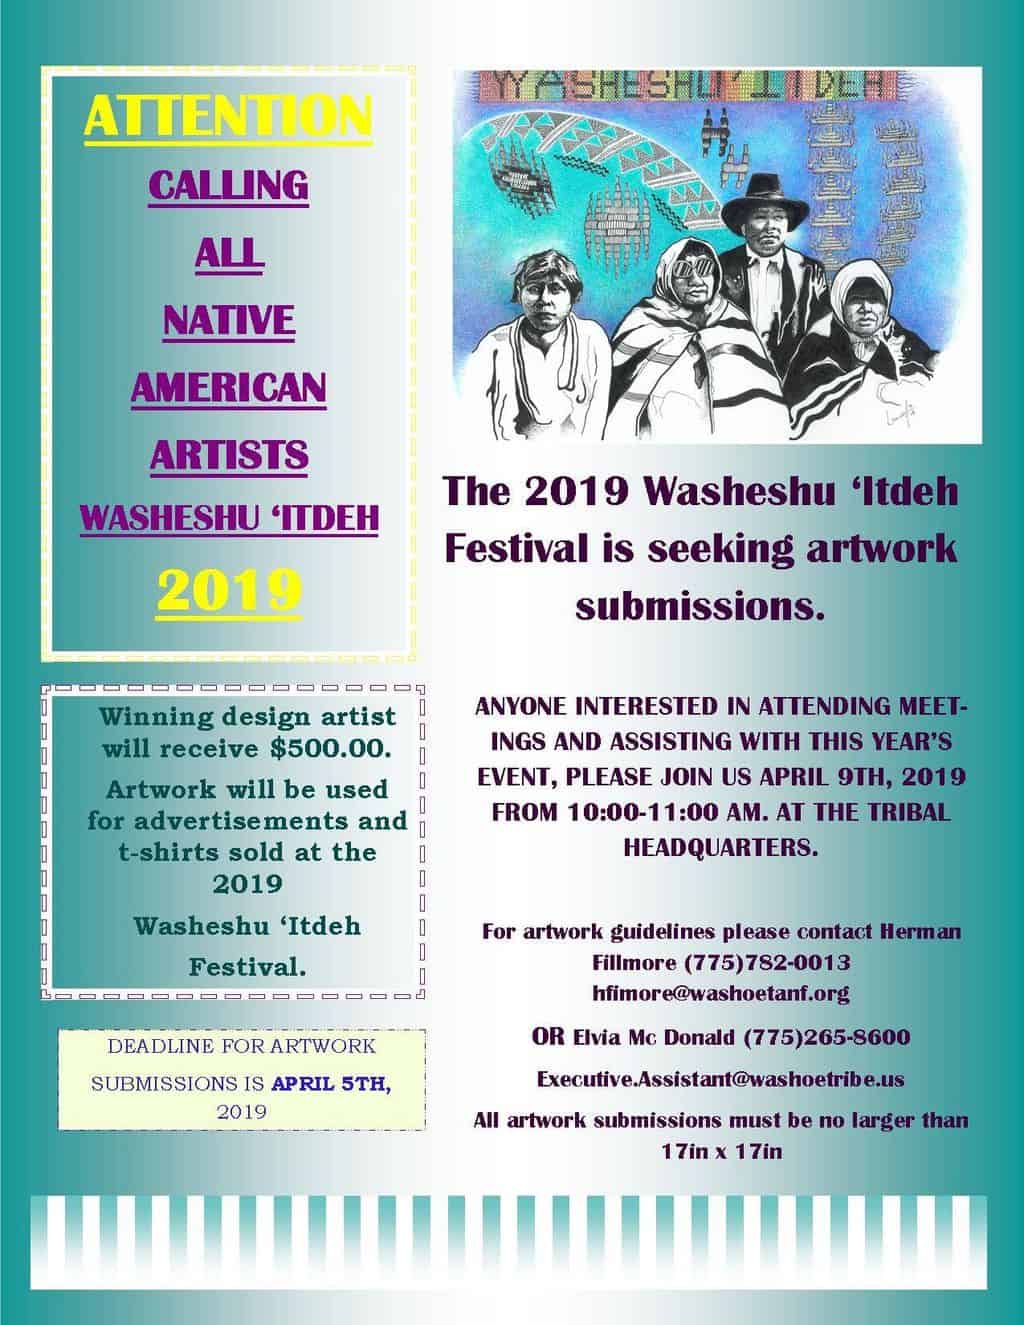 The 2019 Washeshu 'Itdeh Festival is seeking artwork submissions